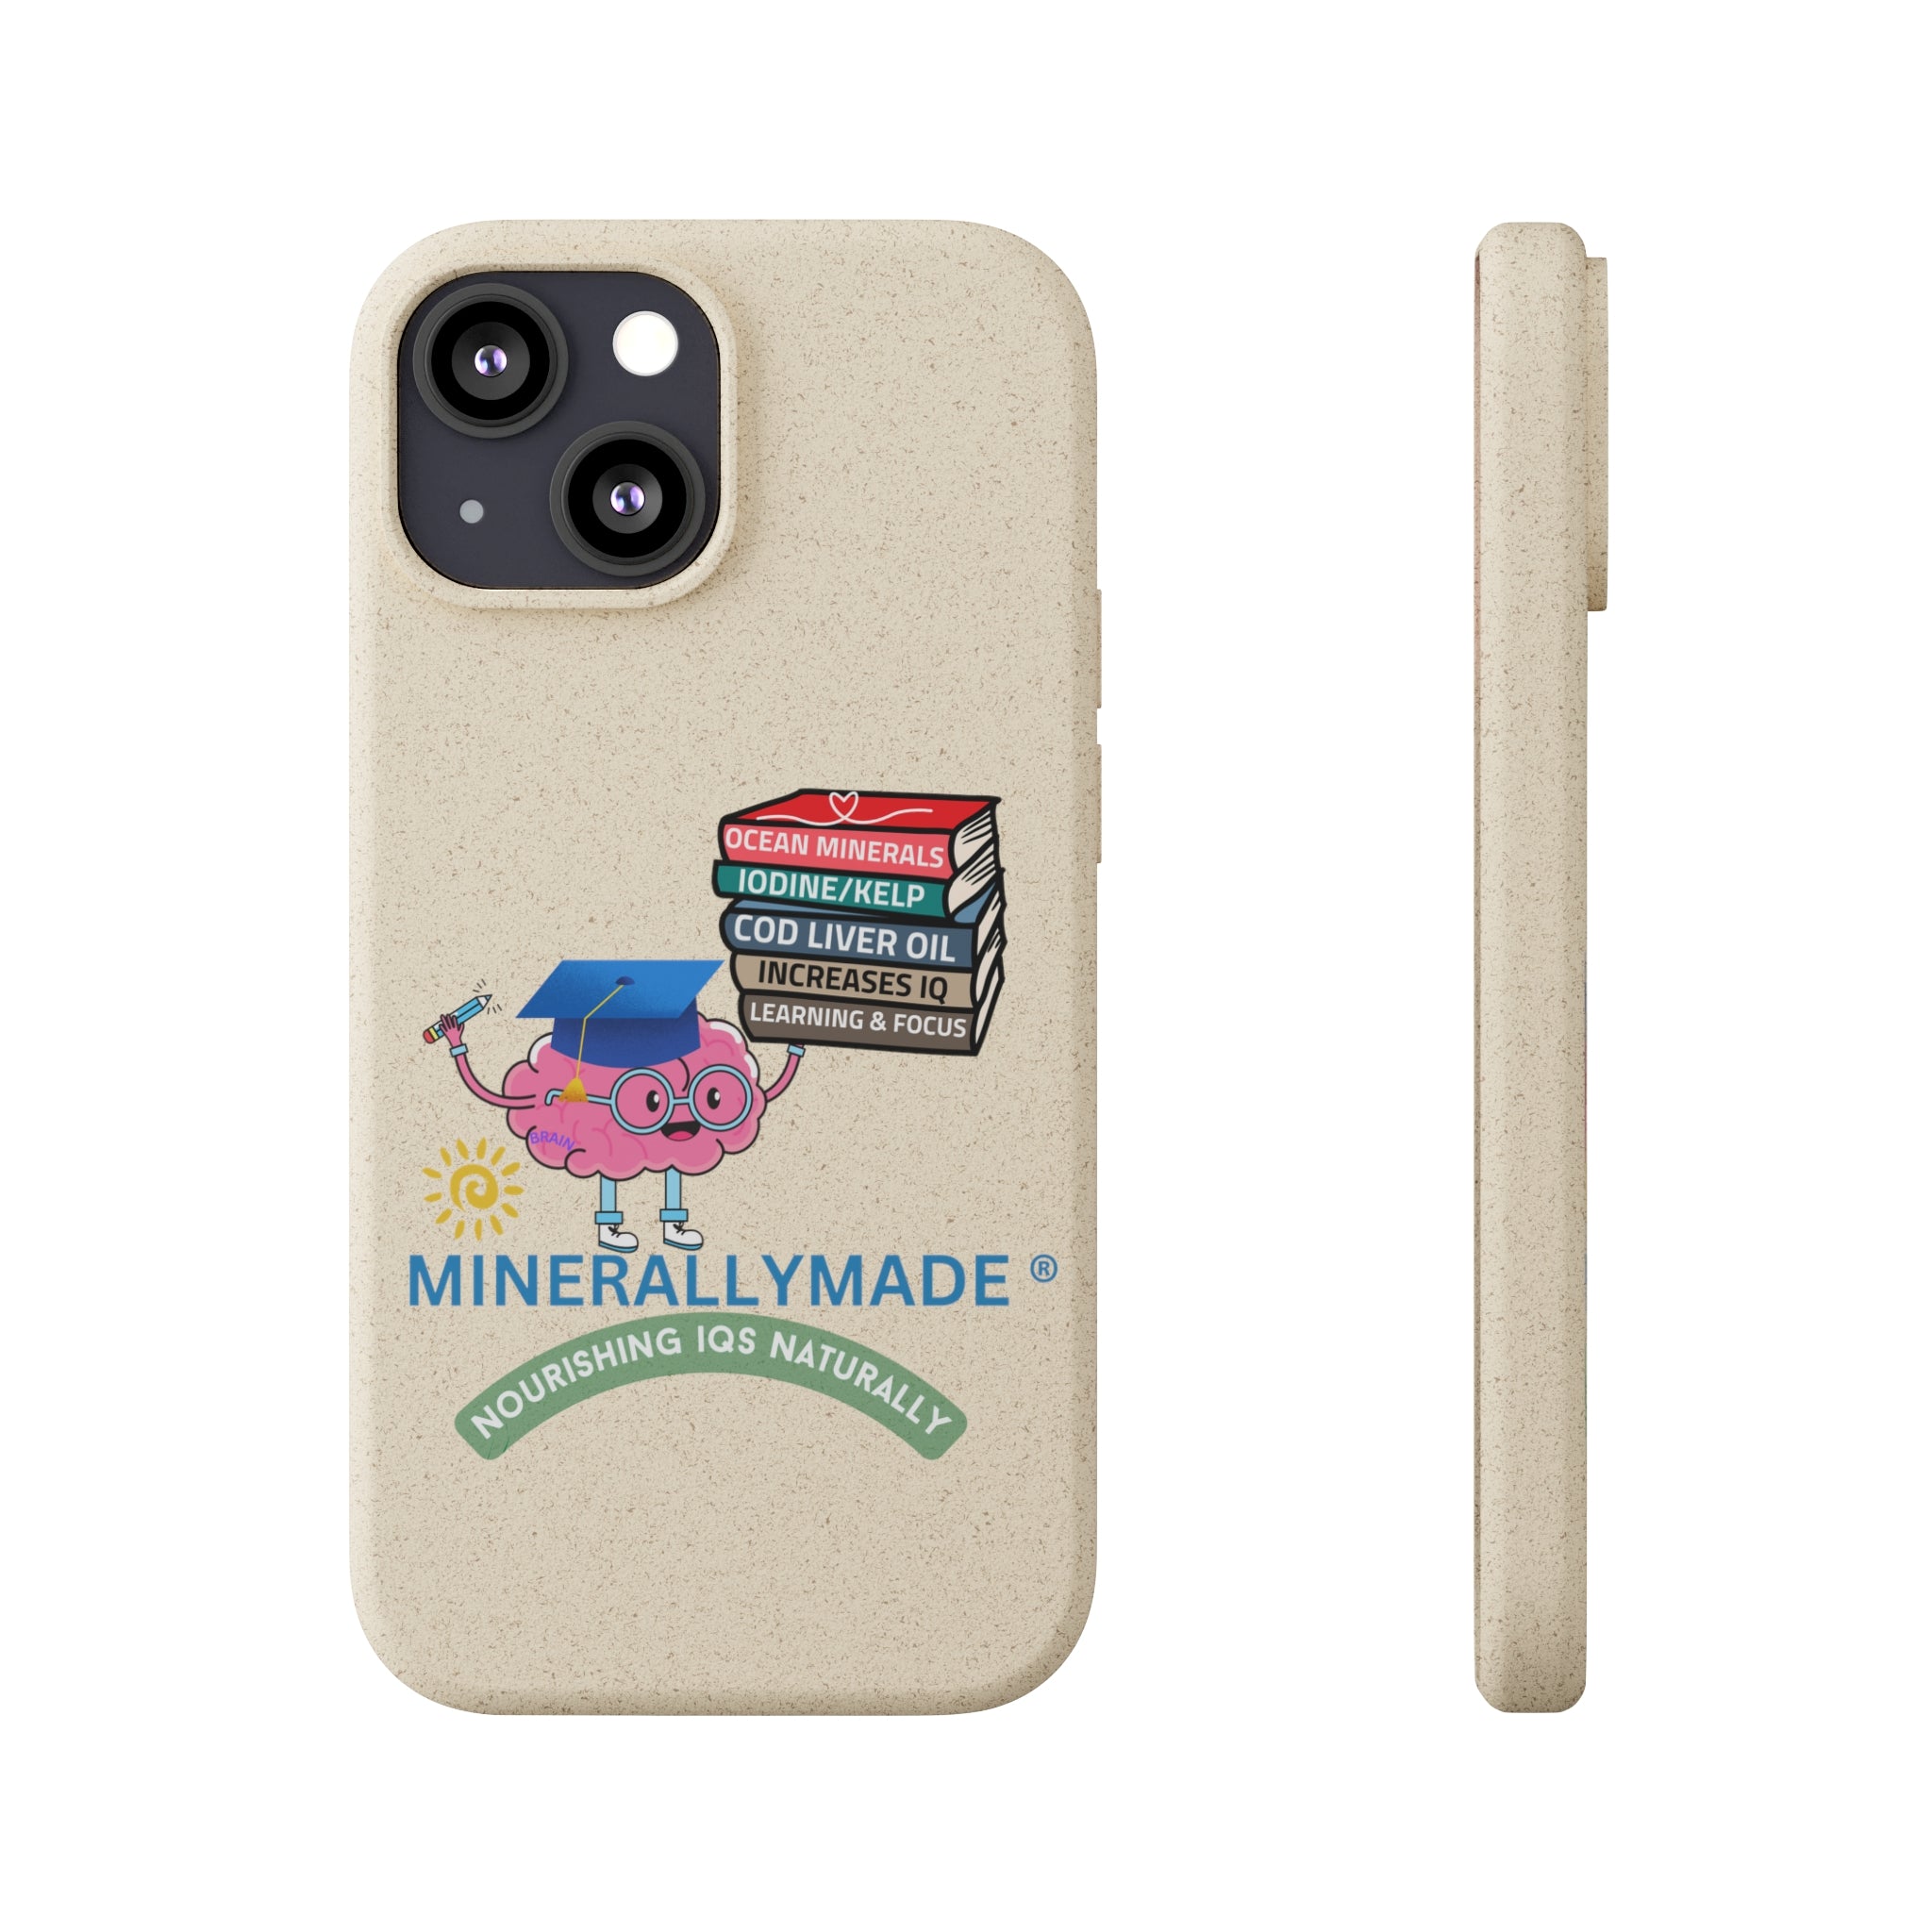 Minerallymade | Nourishing IQs Naturally | Iphones - Biodegradable Cases